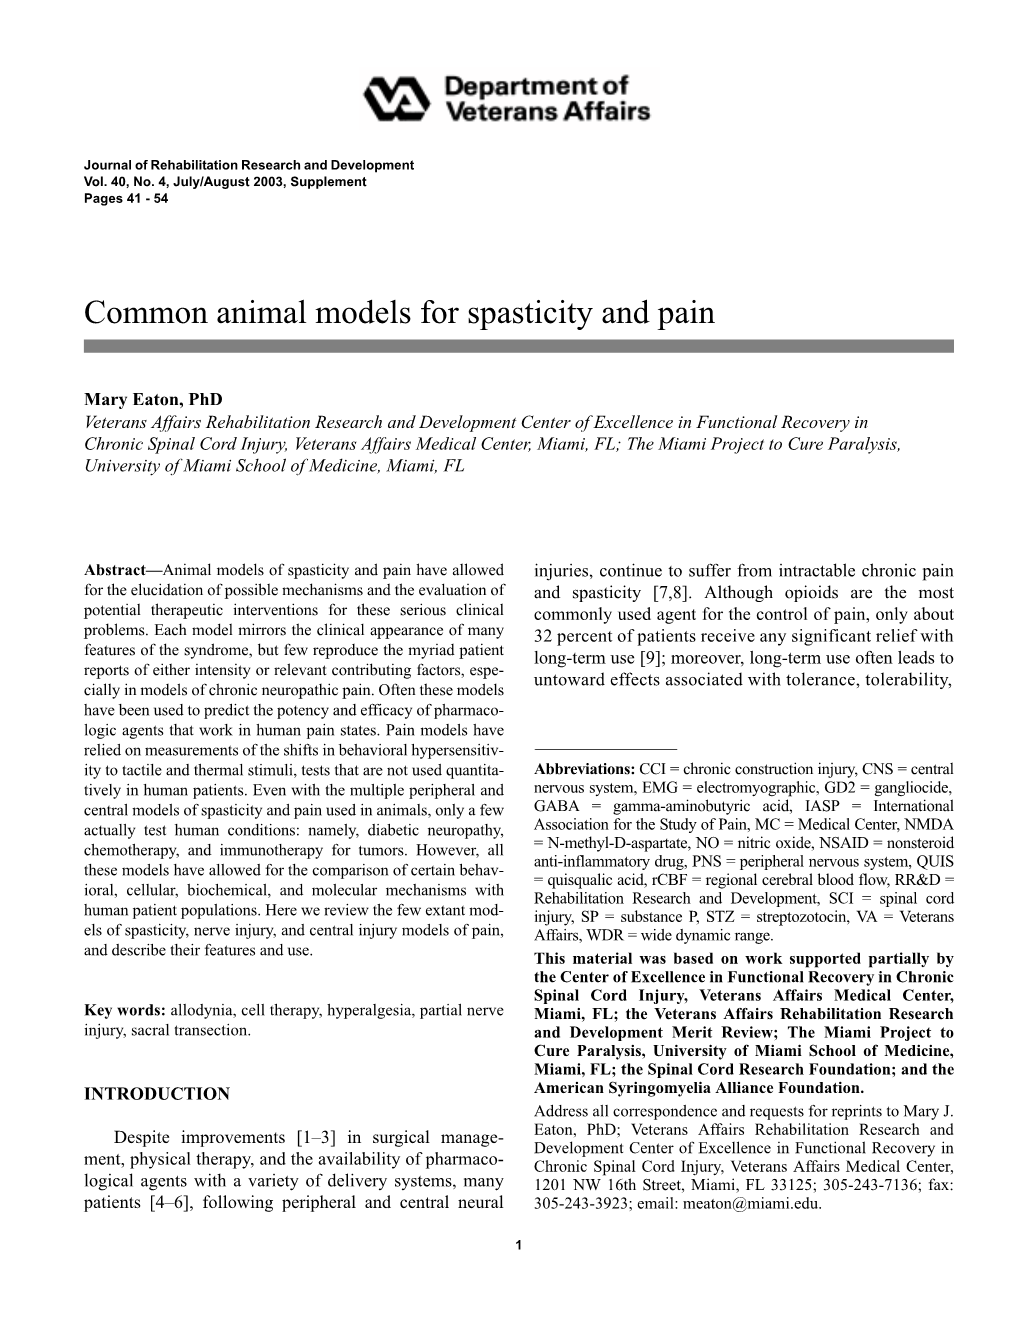 Common Animal Models for Spasticity and Pain